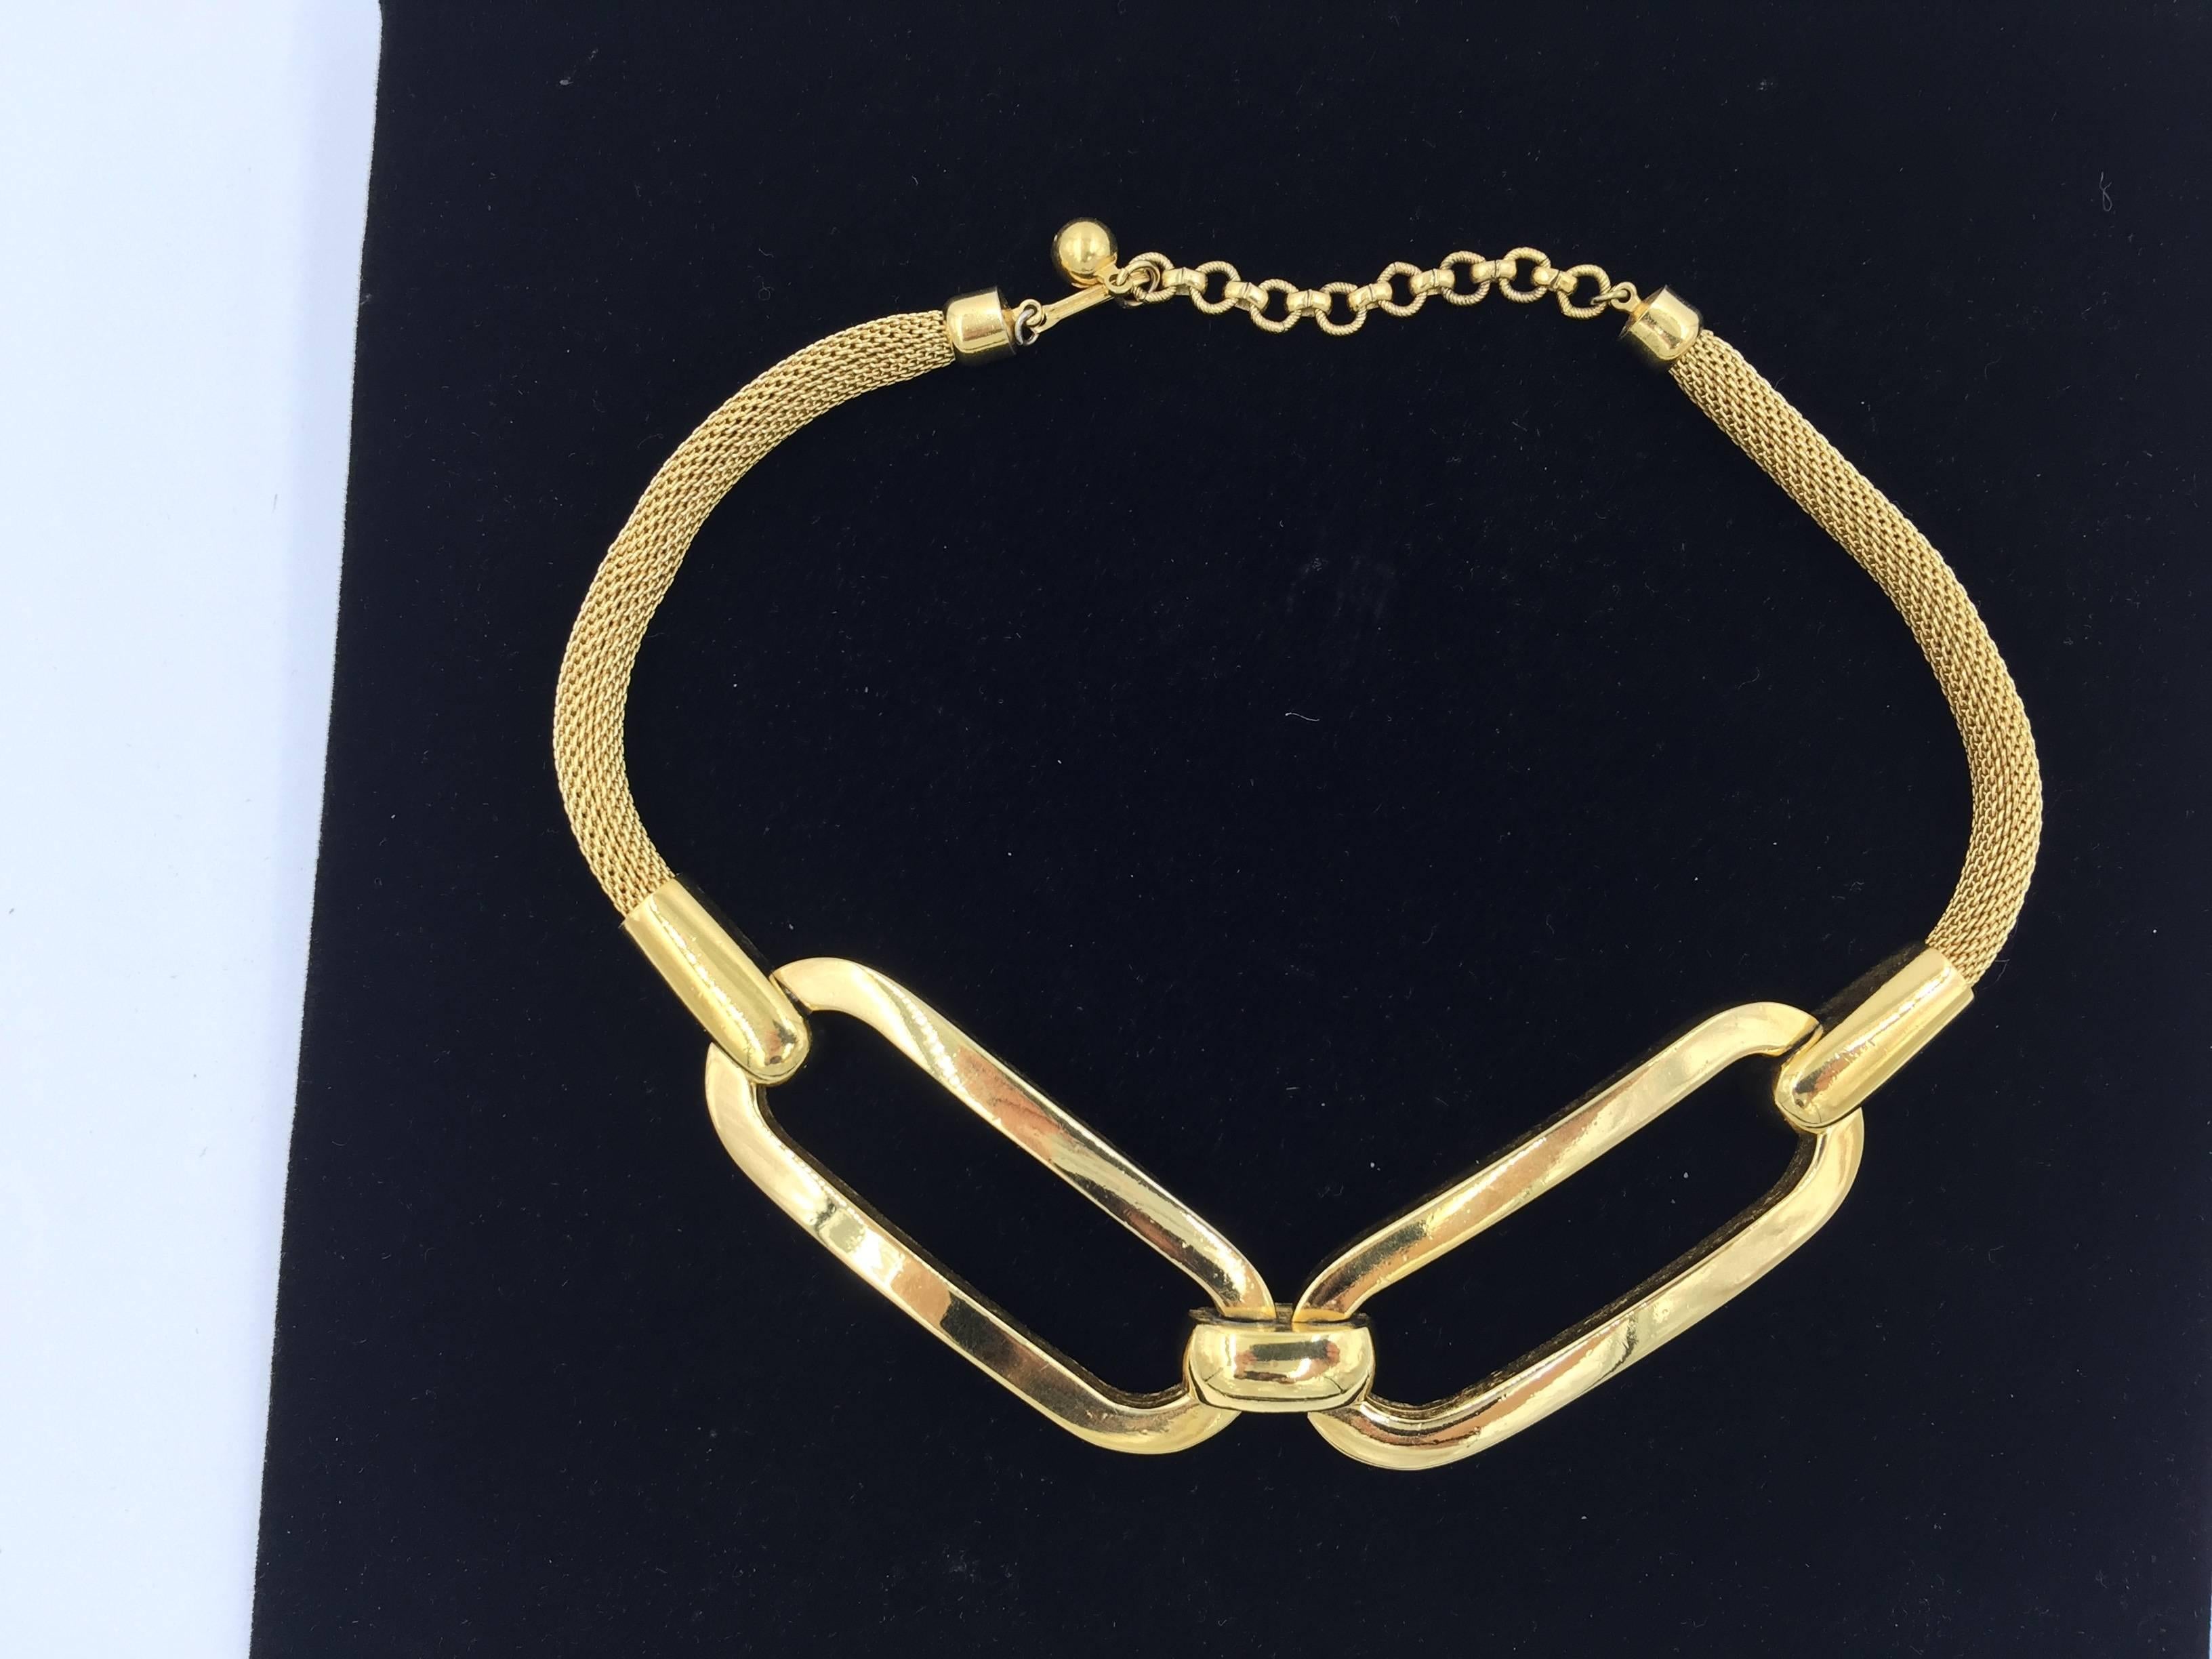 Women's Modernist Givenchy Necklace. 1977